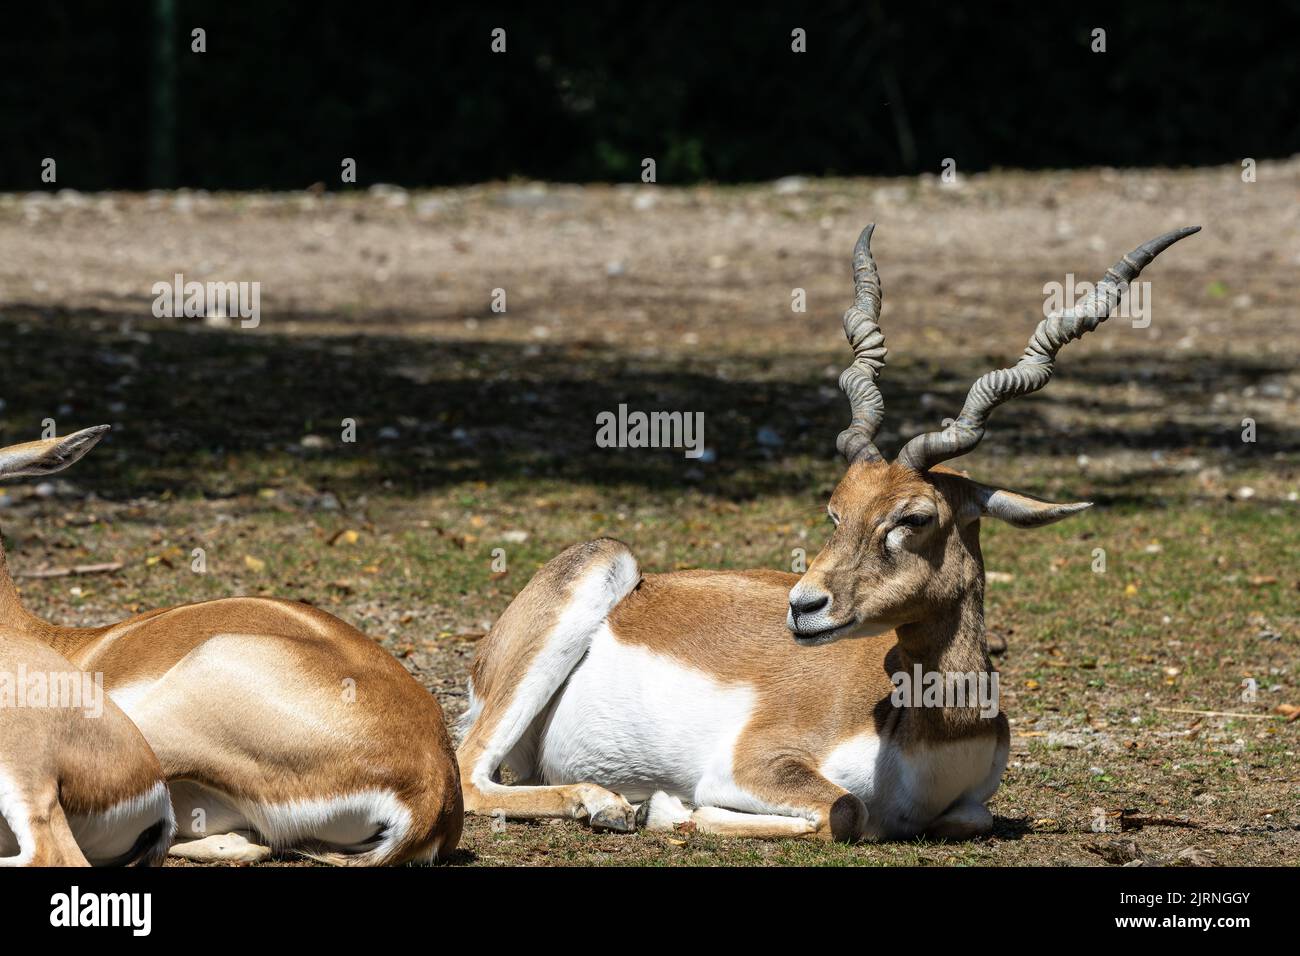 Indian Blackbuck, Antelope cervicapra or Indian antelope. The blackbuck inhabits grassy plains and slightly forested areas. Fast animals, the blackbuc Stock Photo